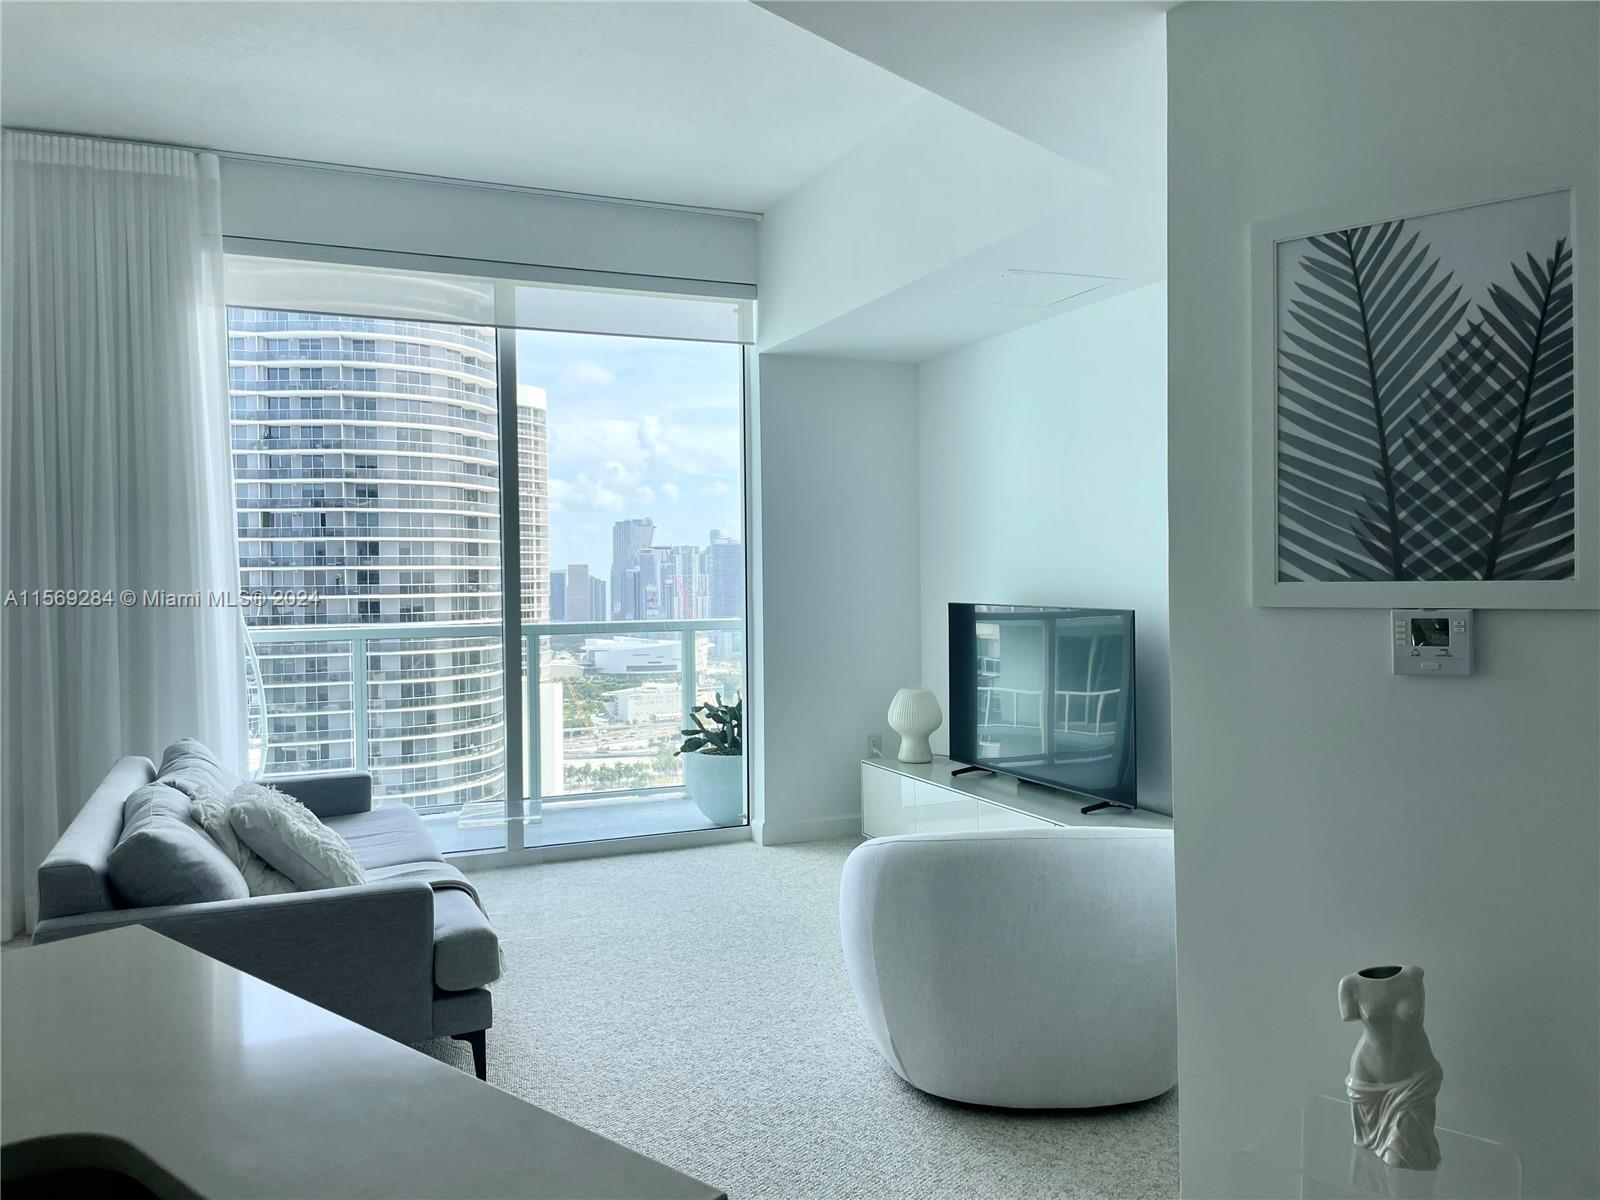 Beautiful light-filled high floor condo with amazing downtown views. Modern design, stainless steel appliances, granite counter tops and high ceilings, walk-in closet, electronic shades, stacked washer and dryer in unit. 
Located across the street from Margaret Pace Park and minutes away from Midtown, Downtown, Wynwood, Brickell, Miami Beach, Design District. 
Amenities: 24-hour security and concierge, 24-hour valet parking, fitness center with sauna rooms, two outdoor pools, theater room, convenient store in the lobby, beauty salon, dentist, cafeteria.
Can be sold with furniture.